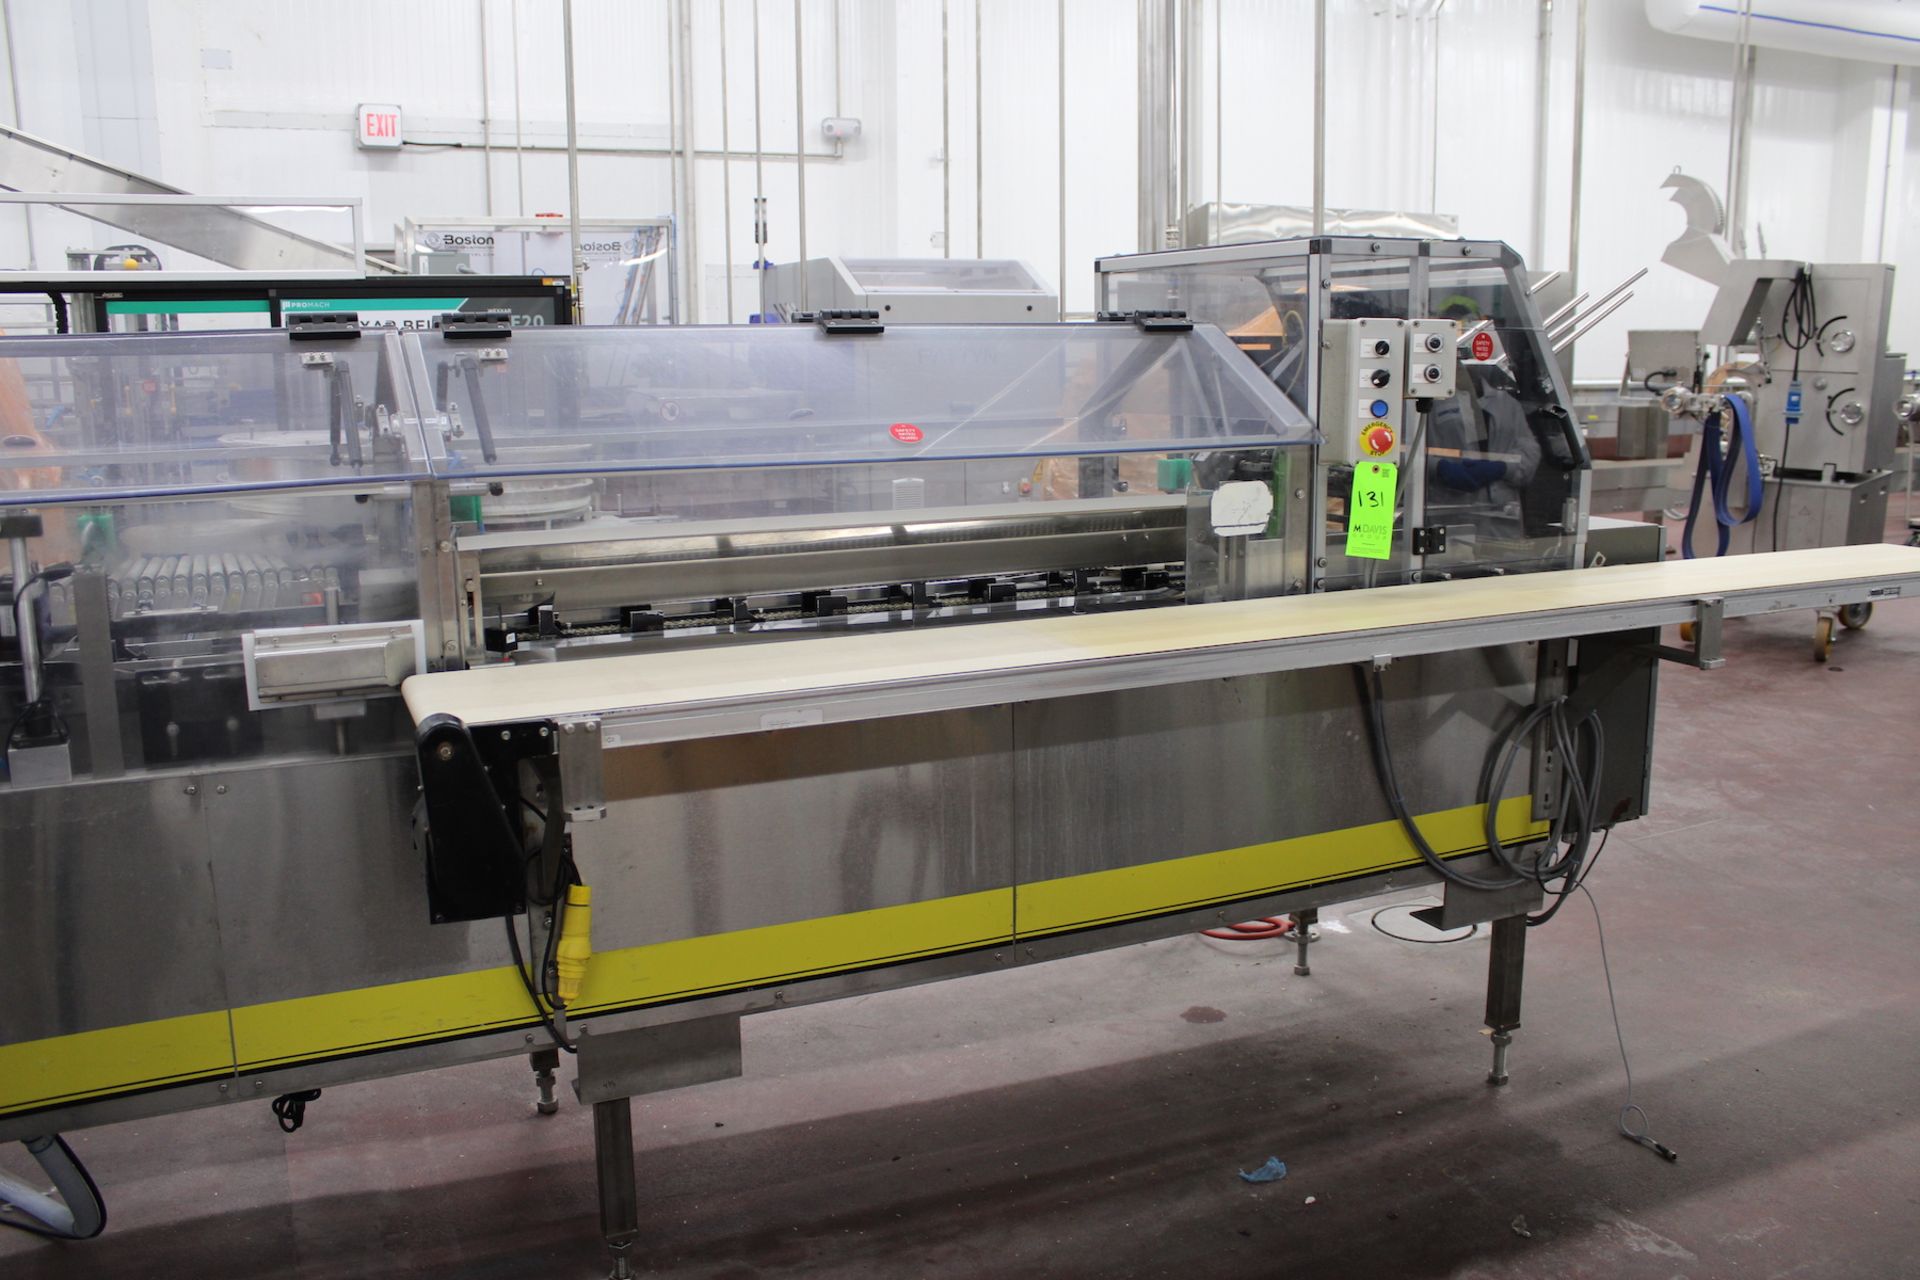 2015 ECONOCORP ECONOSEAL CONTINUOUS MOTION CARTONER, MODEL 10115, S/N 10505 TYPE ECONO 60, EQUPPED